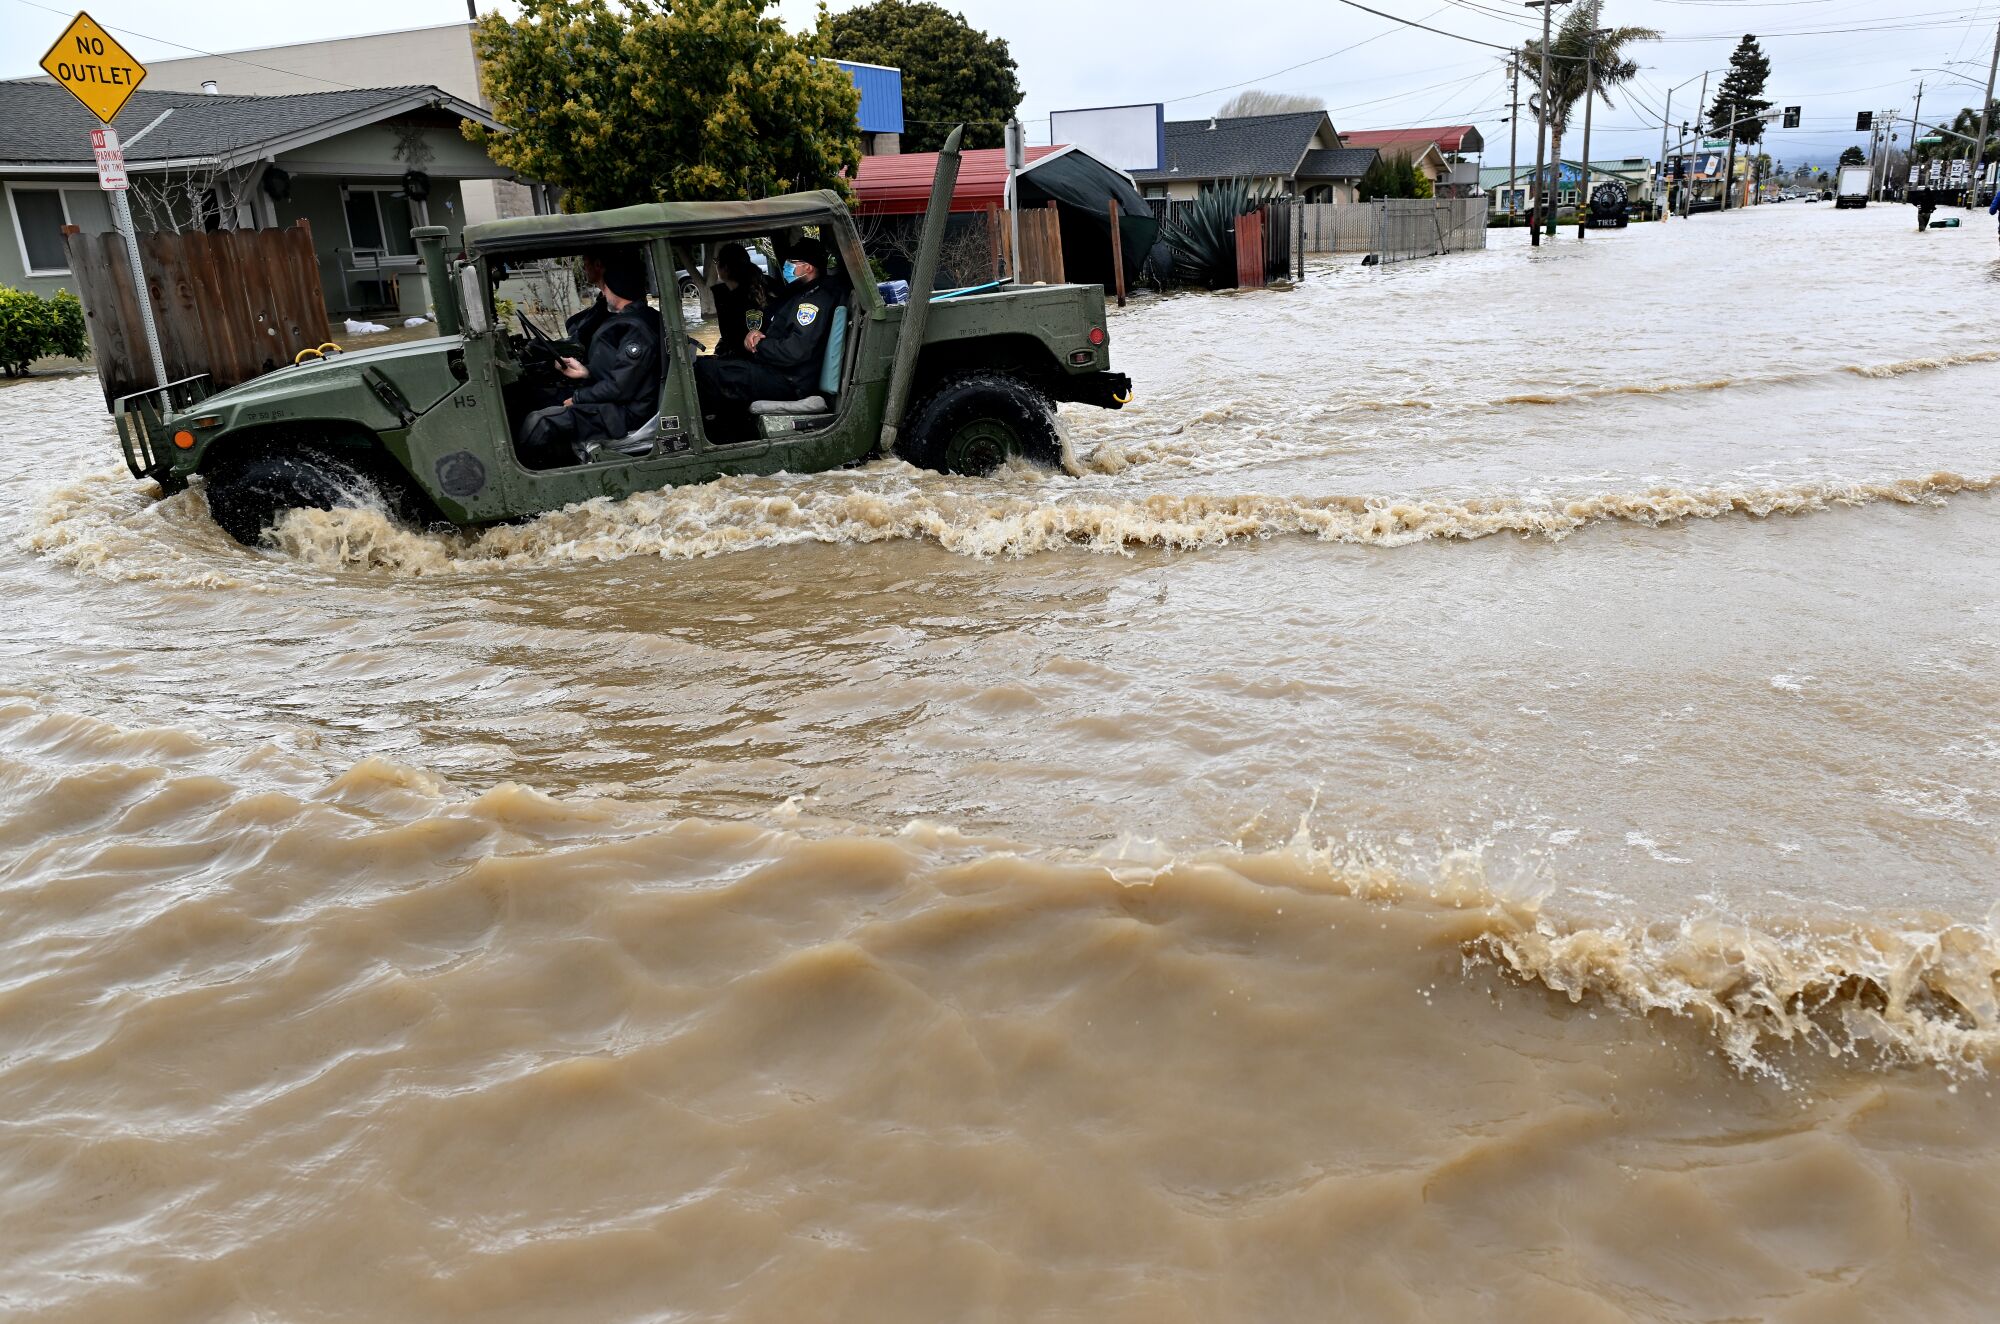 A military vehicle creates a wake as it moved down a flooded street.